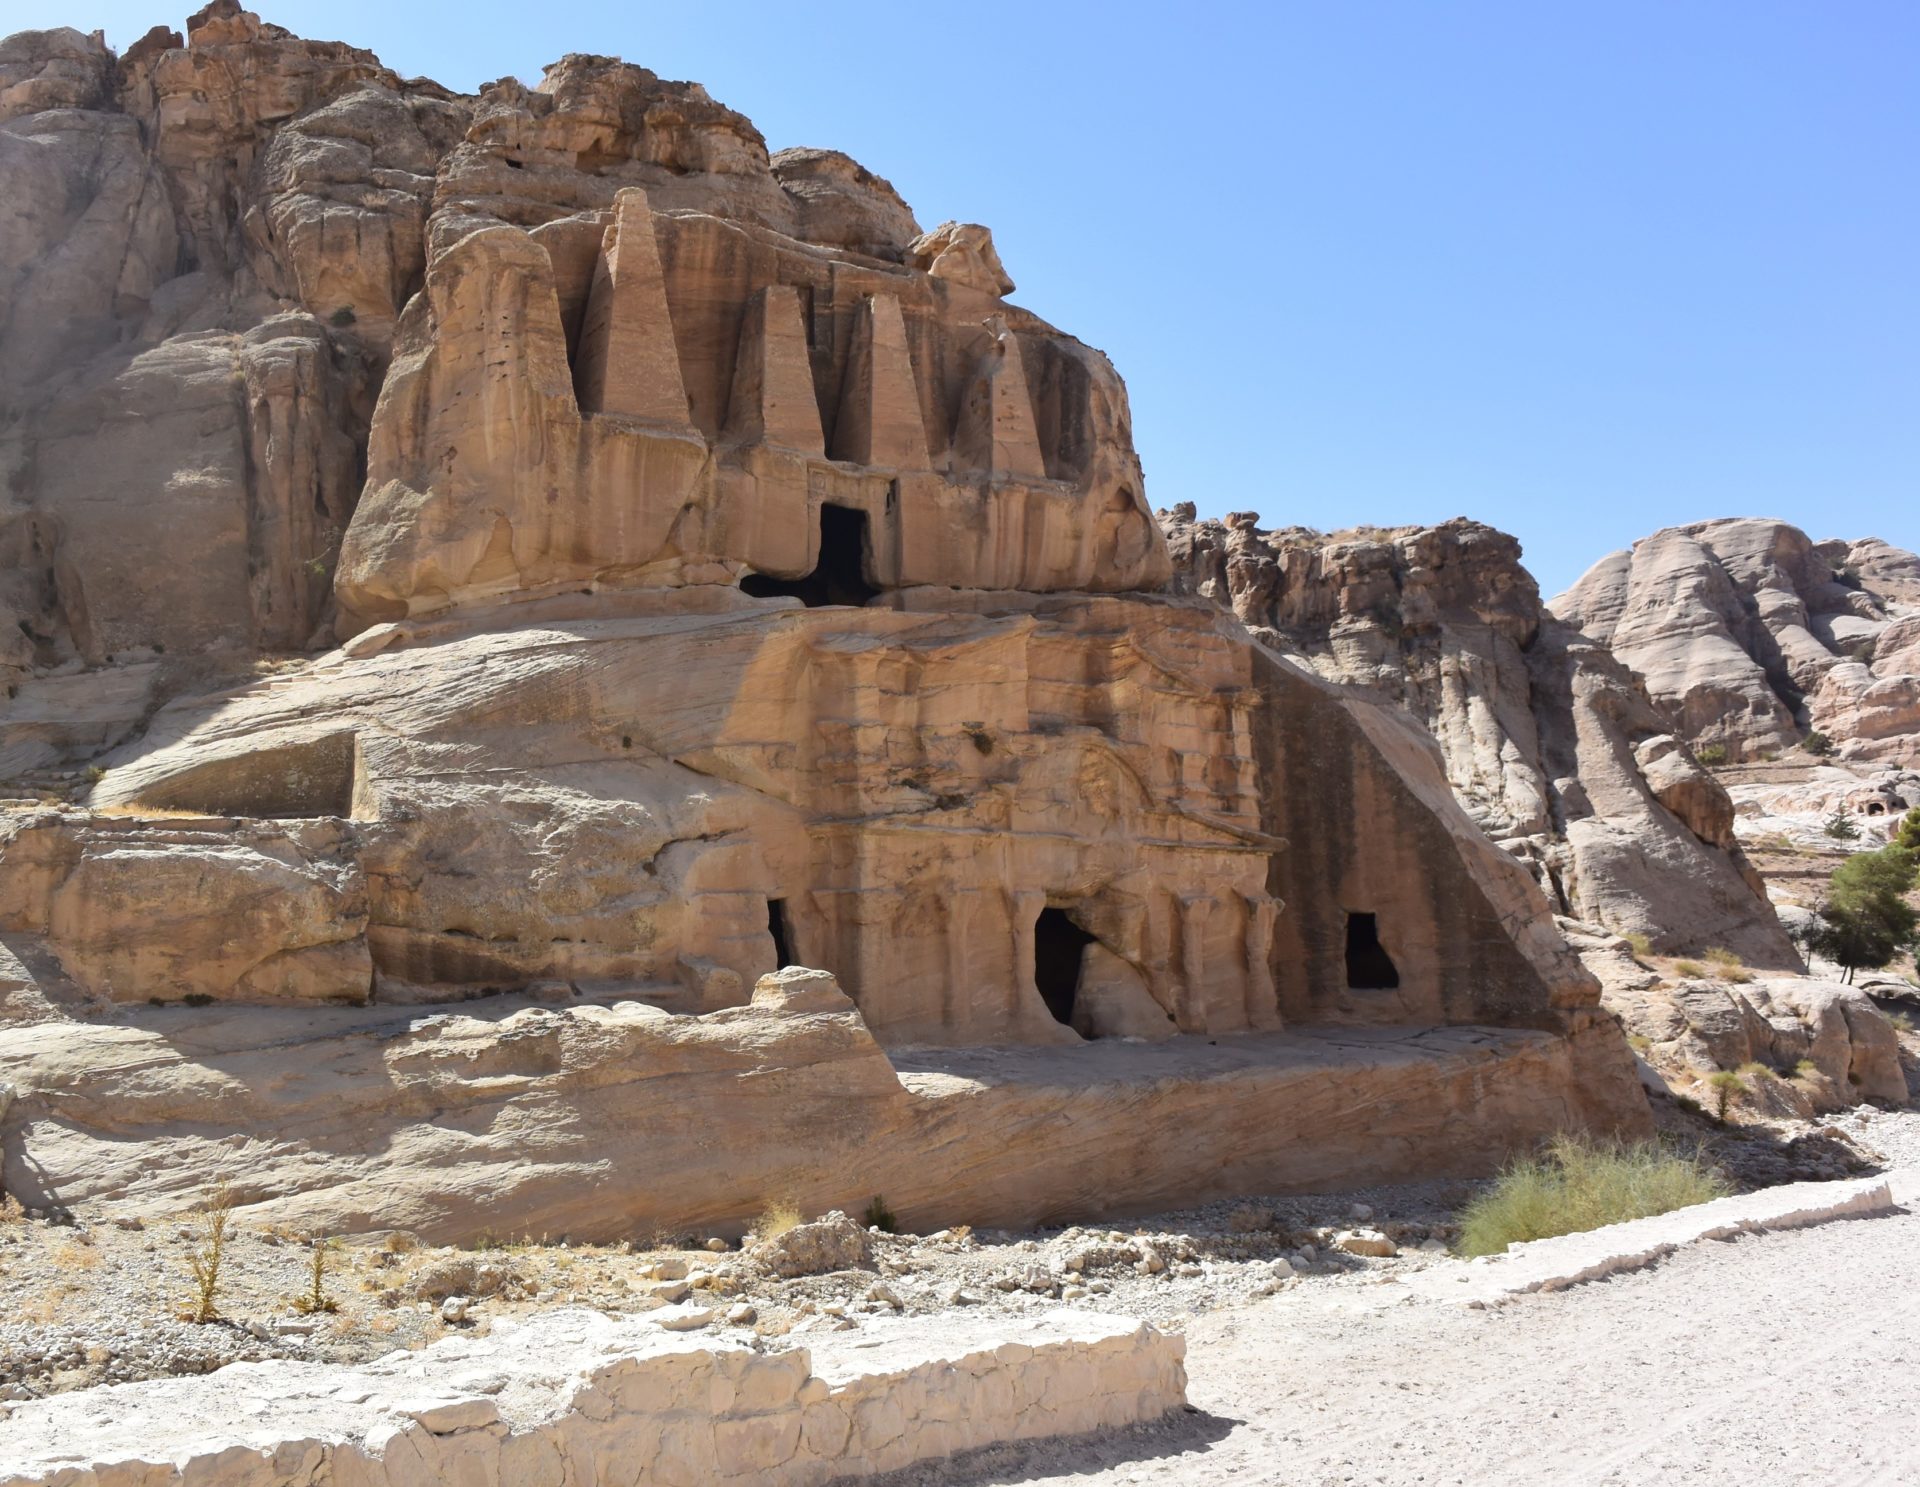 a rock structure in the desert with Petra in the background